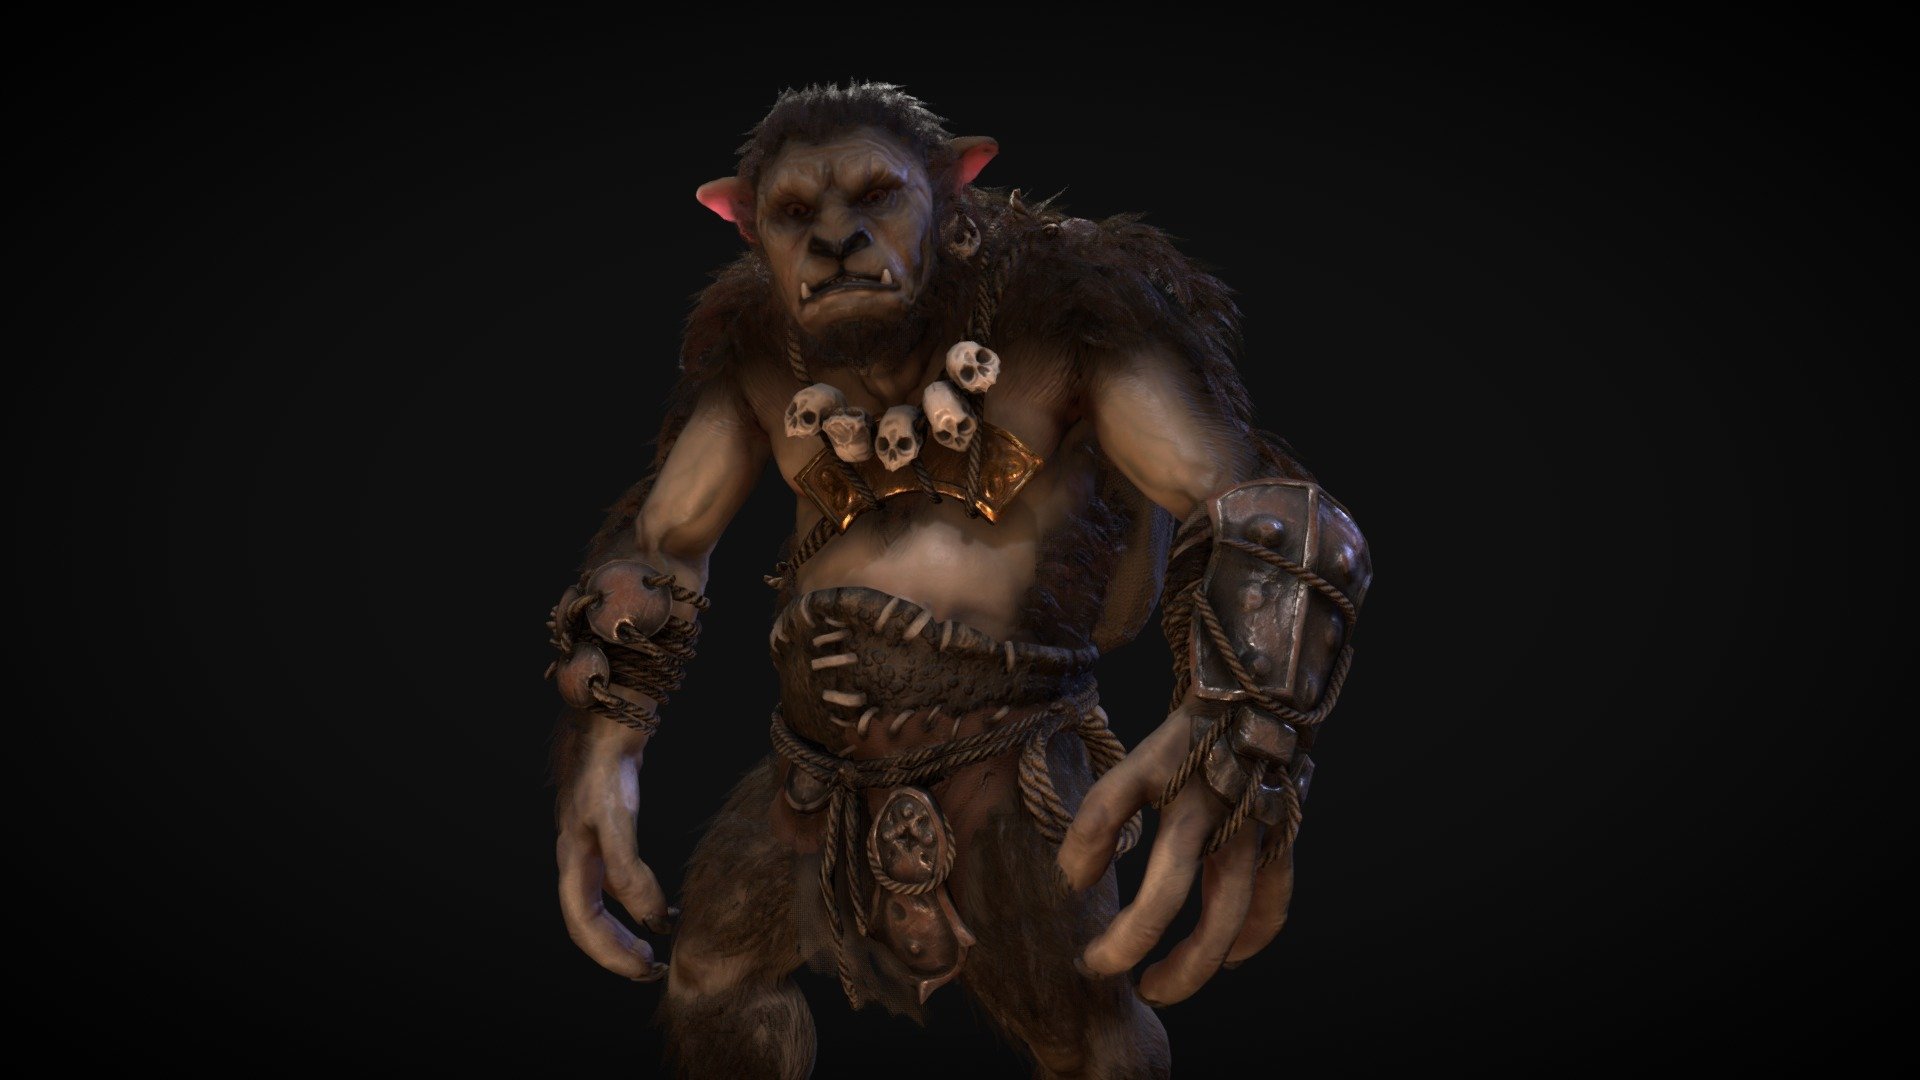 I stumbled across an amazing concept of this bugbear by Jaemin Kim and thought it'd be the perfect opportunity to make a full character from a concept. I started by sculpting the whole body in ZBrush and then retopologized using the Zsphere tool. I then went on to unwrap him in 3ds Max, texture him in Substance Painter, finally using Maya to rig and do the simple breathing animation.

Check out my Artstation for more: https://www.artstation.com/owenedwards - The Bugbear - 3D model by OwenEdwards (@noonesaidwords) 3d model